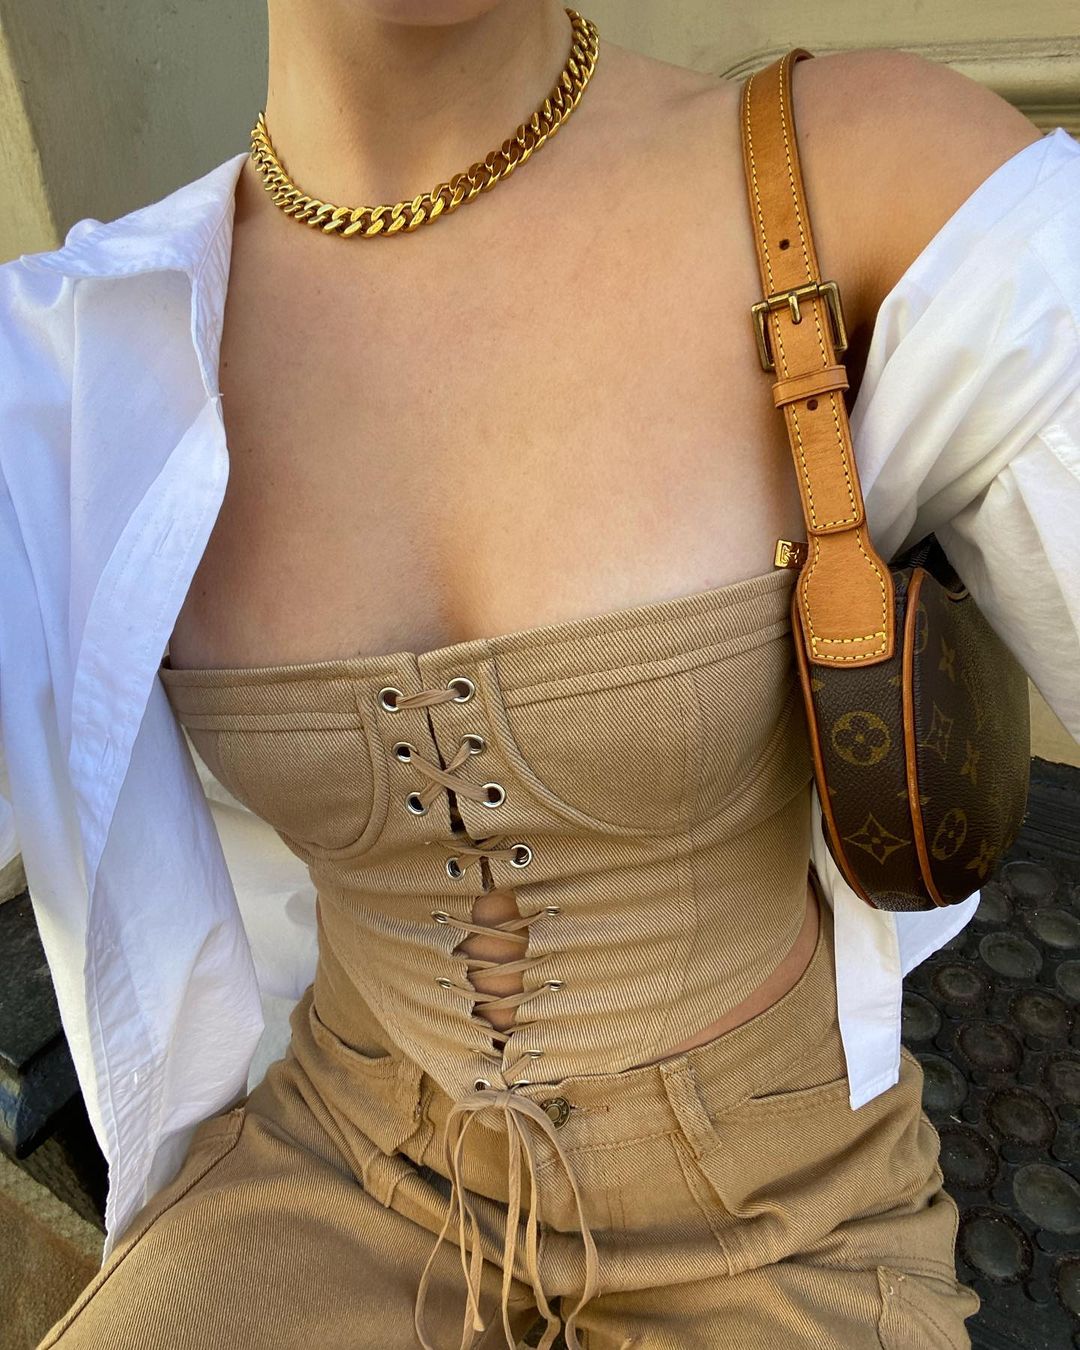 Corset Top Outfits: @maggie_mccormack wears a lace-up beige corset top